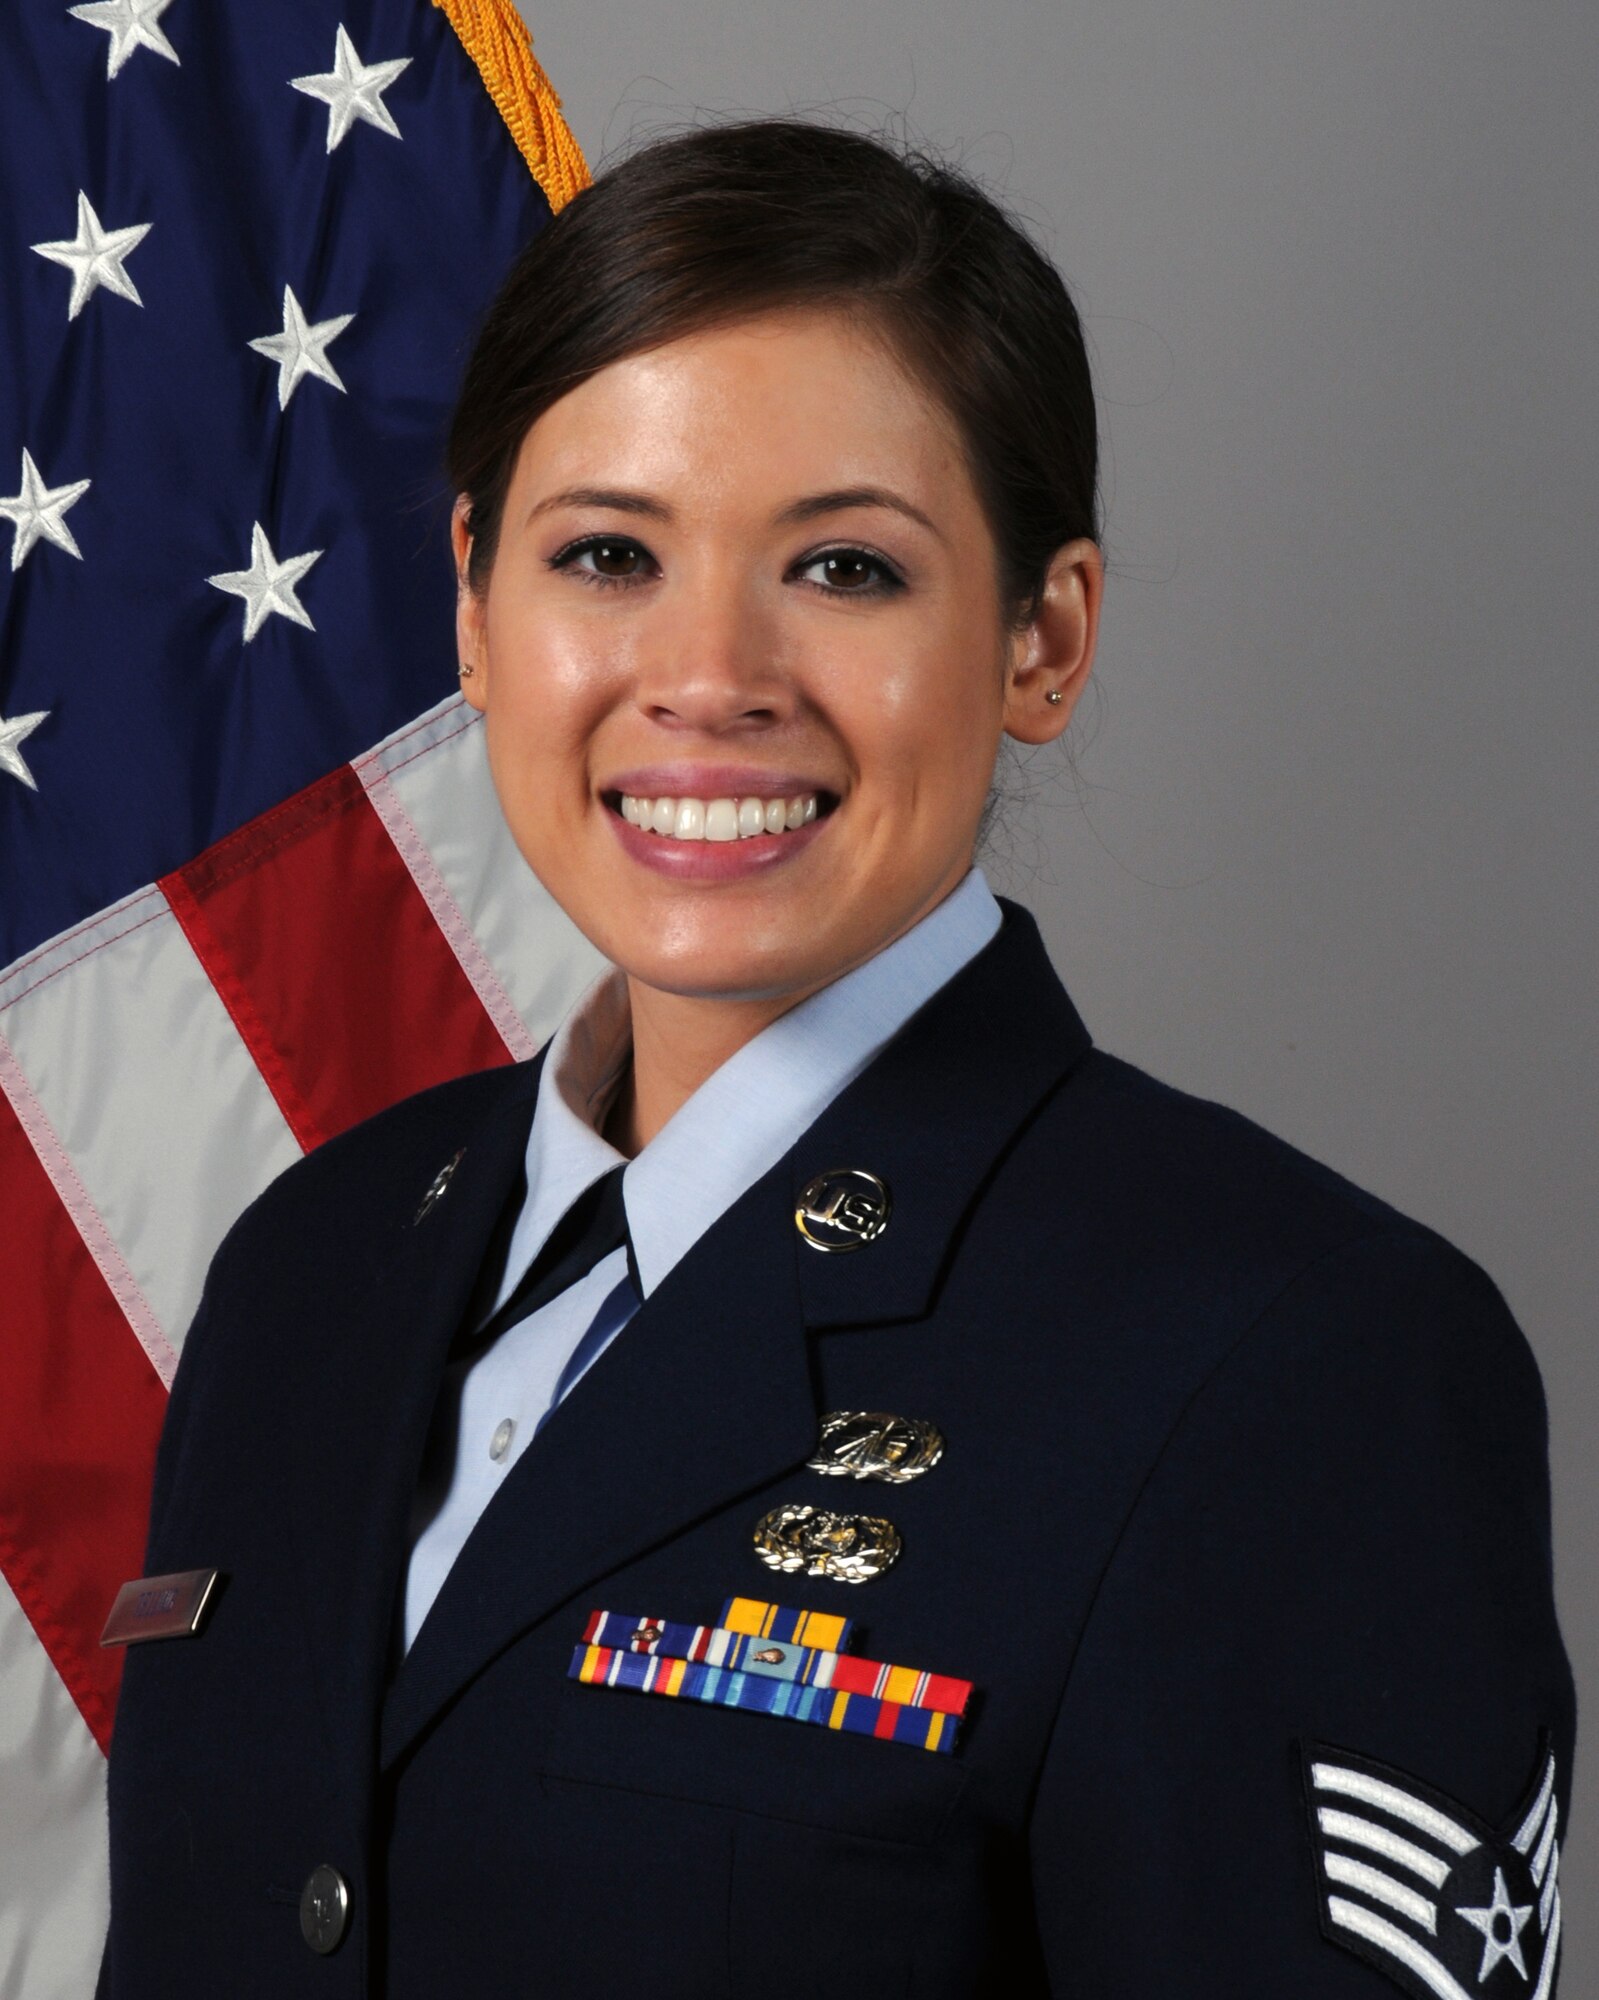 Staff Sgt. Crystal Telling, a financial management technician in the 119th Comptroller Flight, is the North Dakota Air National Guard noncommissioned officer of the year for 2017.